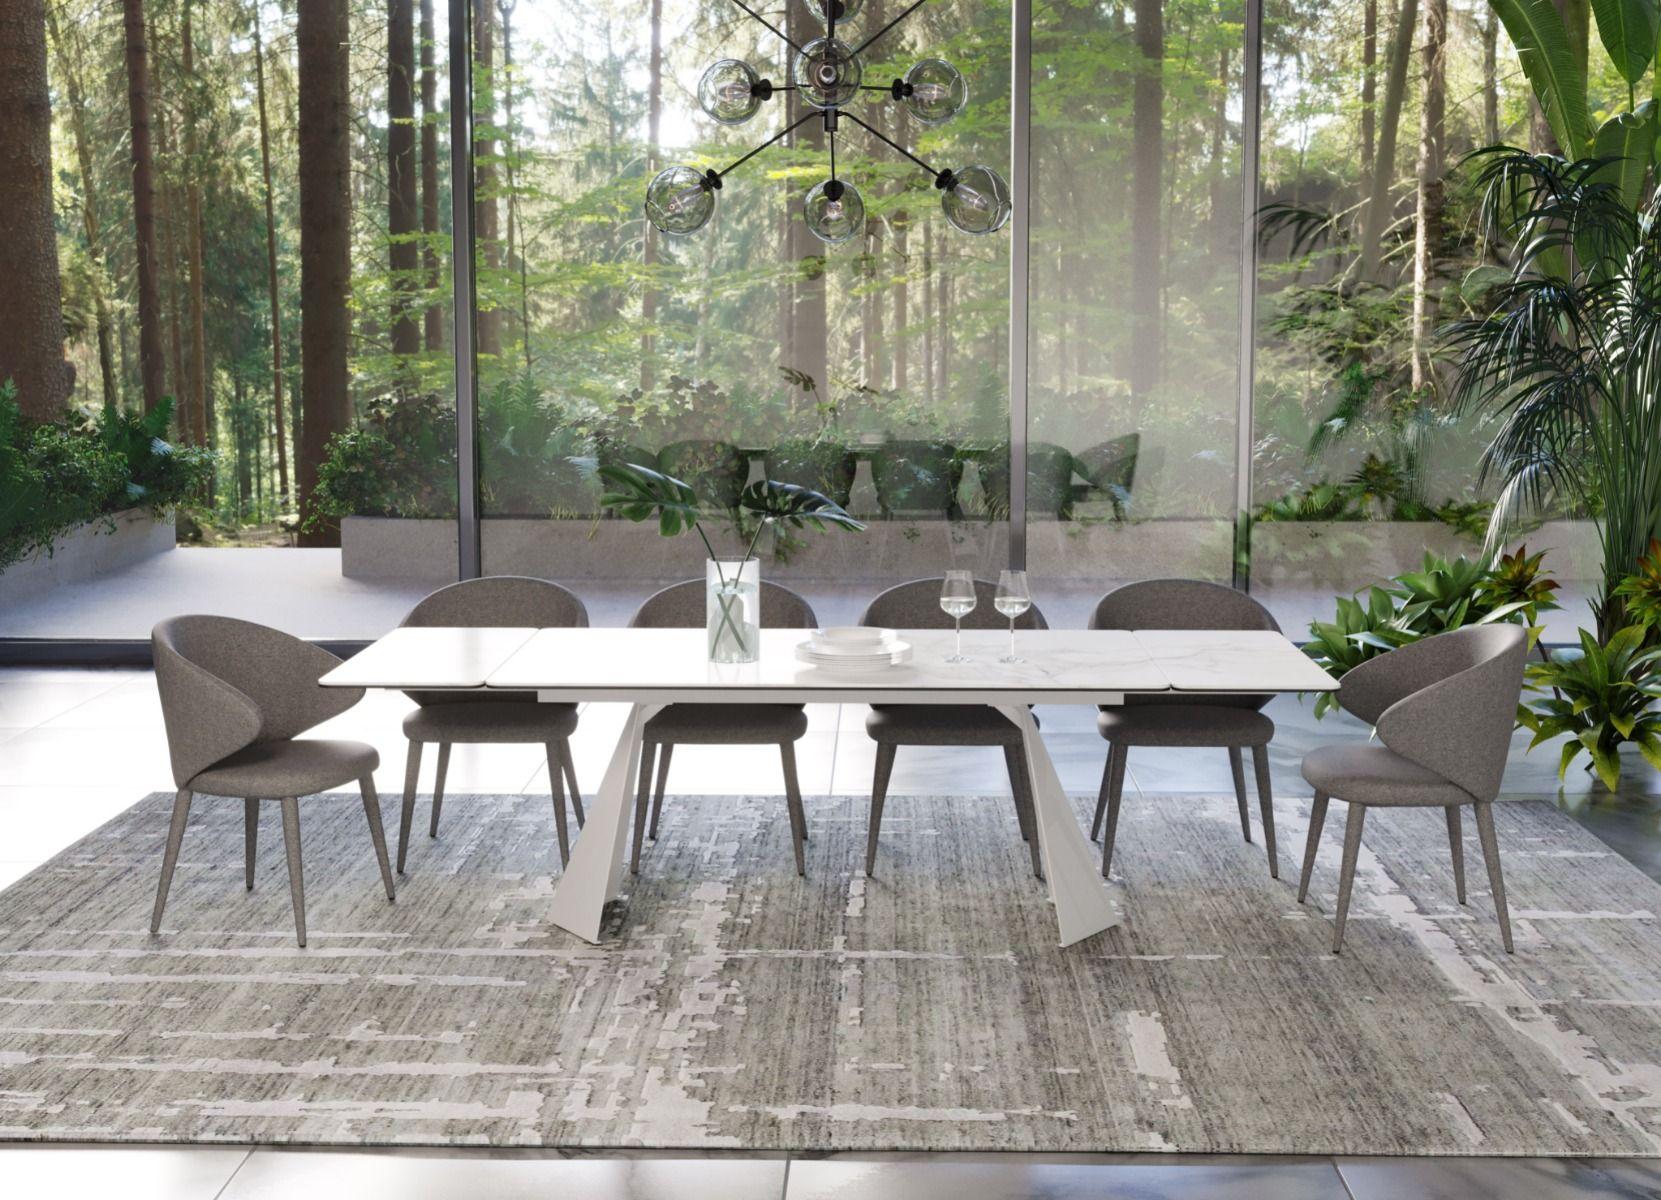 Contemporary, Modern Dining Room Set Encanto Keller VGNS8762-DT-7pcs in White, Gray Fabric